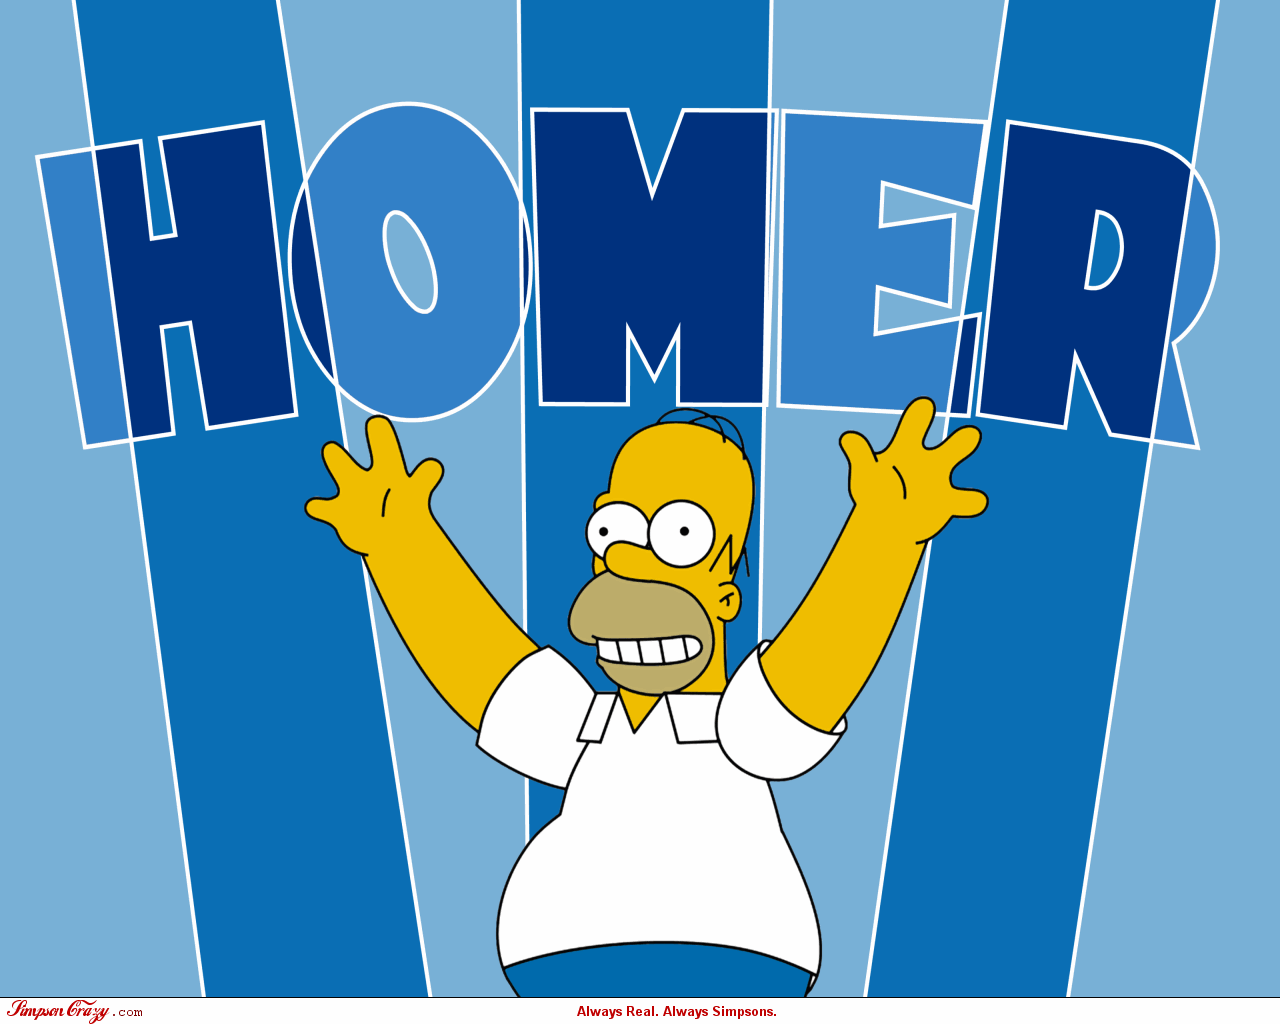 The Simpsons wallpaper